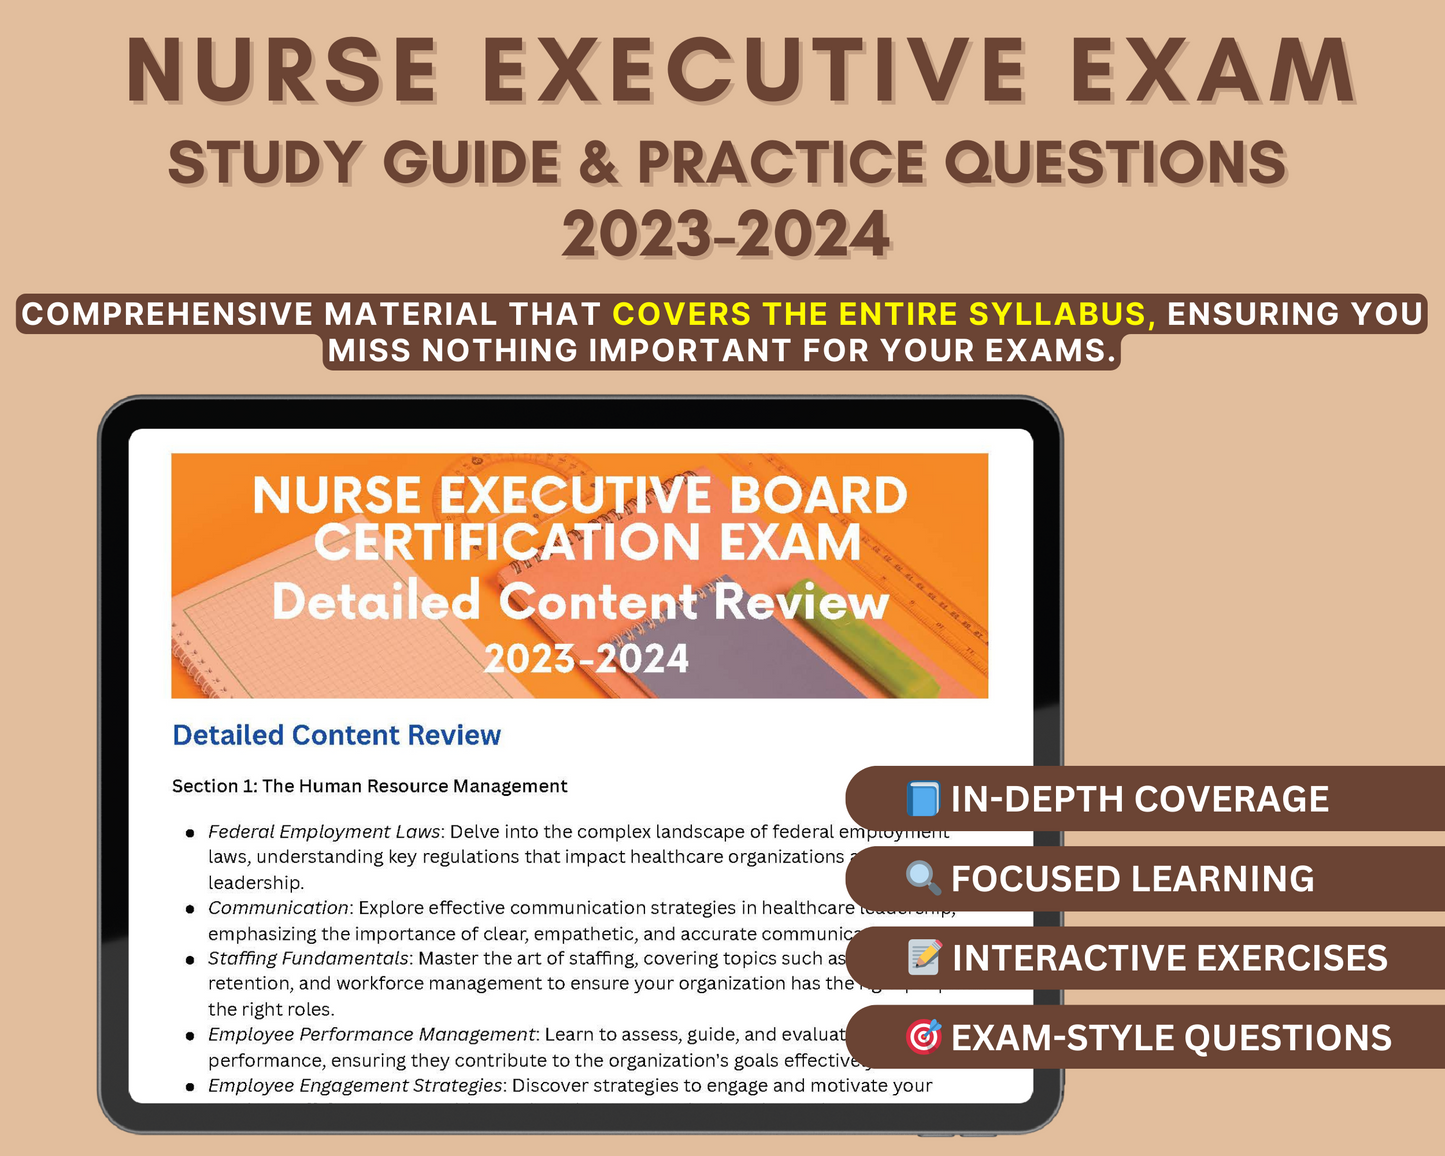 Nurse Executive Exam Study Guide 2023-2024: ANCC Certification Prep with In-Depth Content Review, and Practice Tests